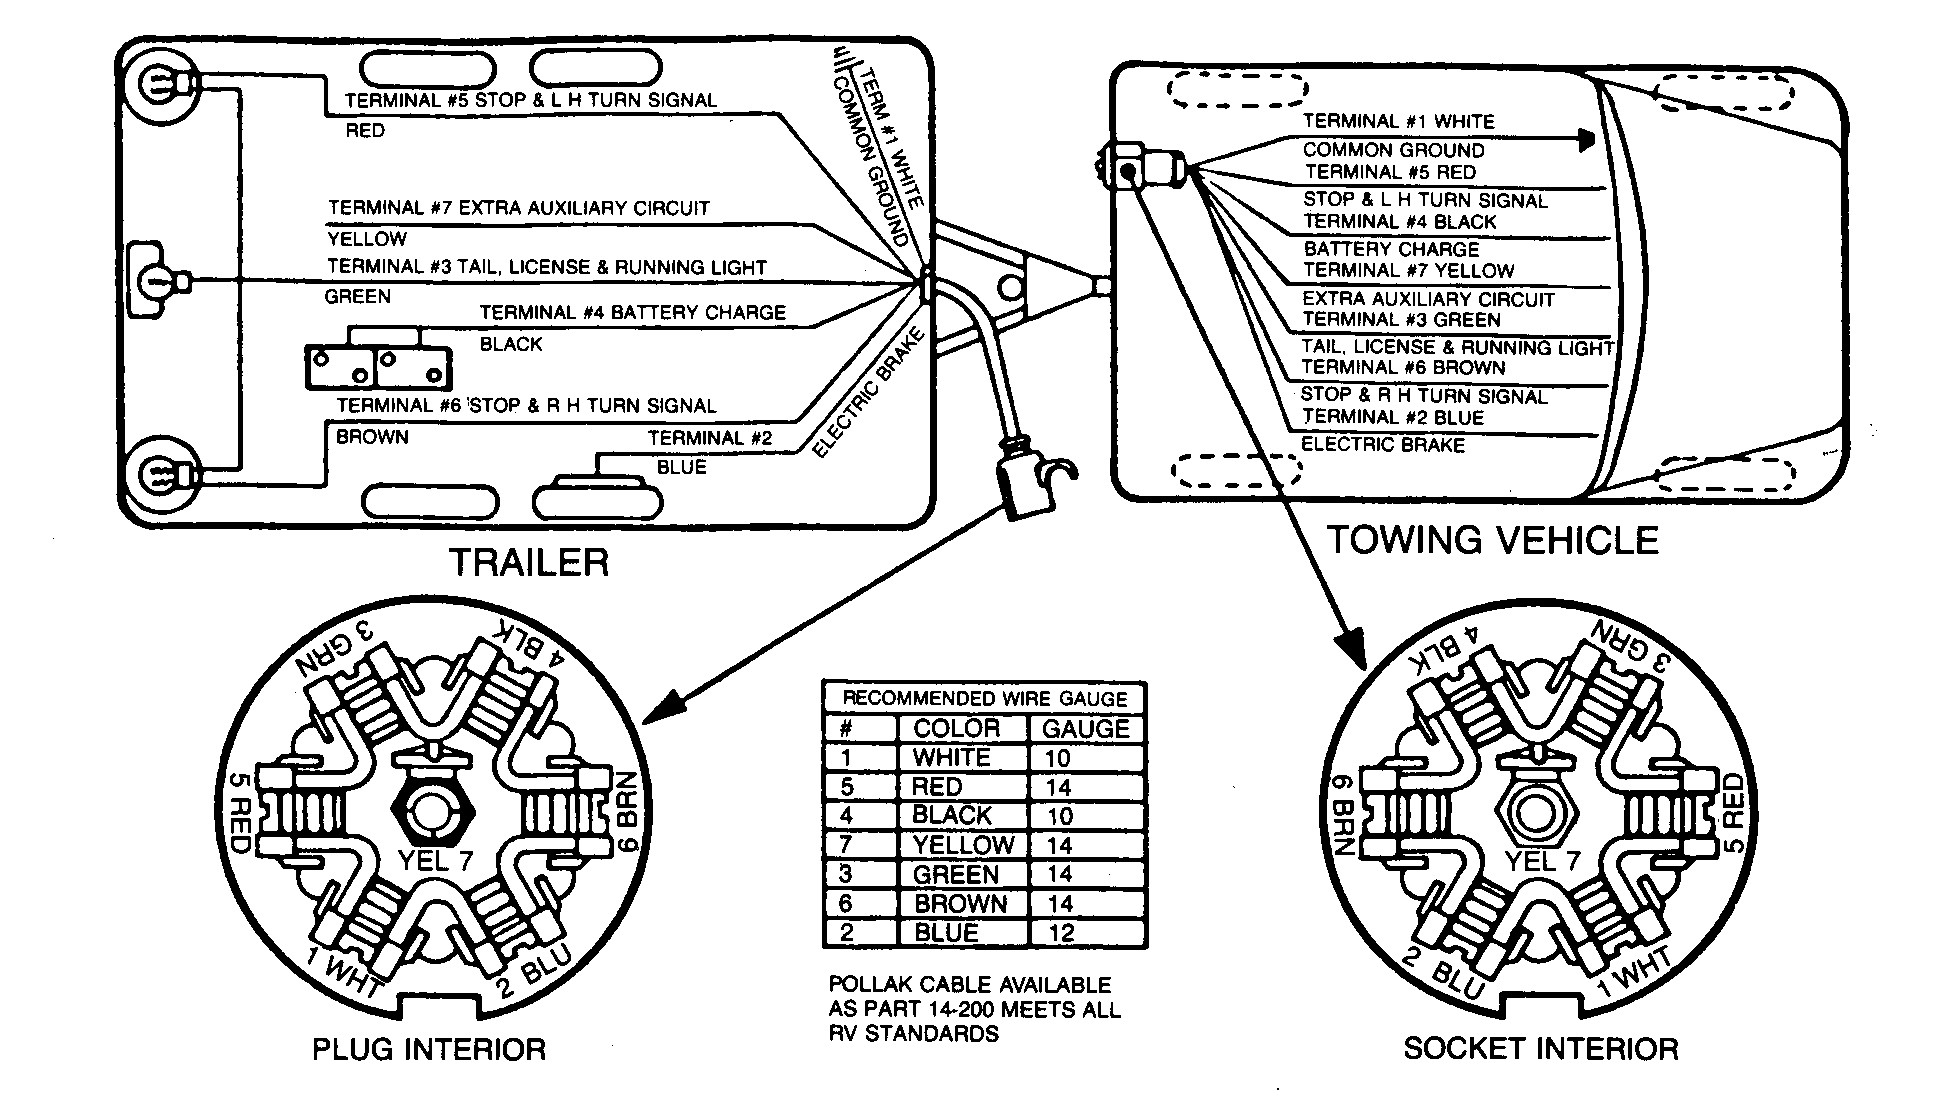 7 Prong Trailer Wiring Diagram New Plug Within Standard Pin - 7 Prong Trailer Plug Wiring Diagram